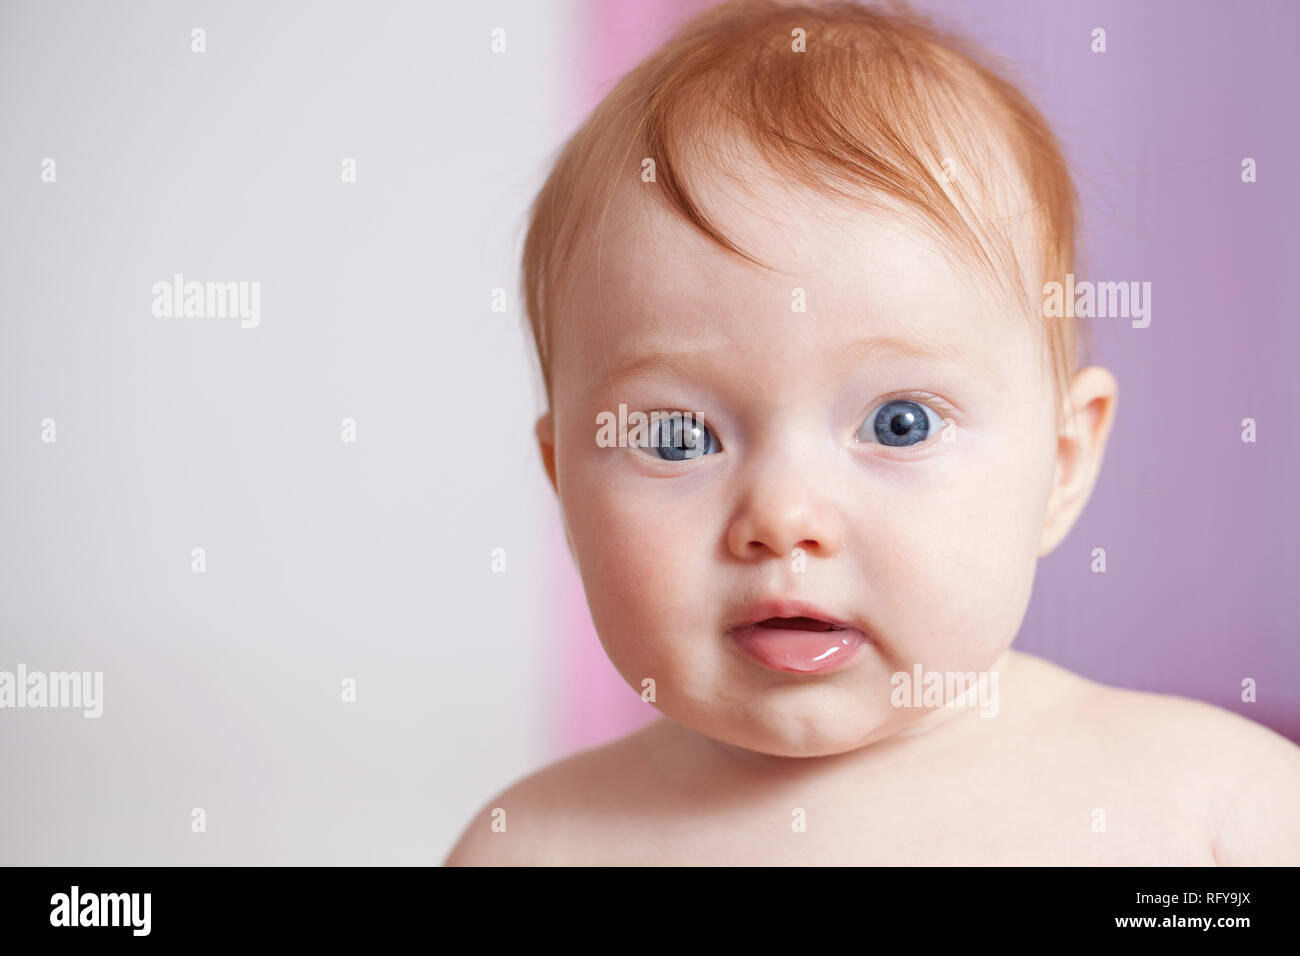 Cute ginger hair baby with blue eyes Stock Photo - Alamy